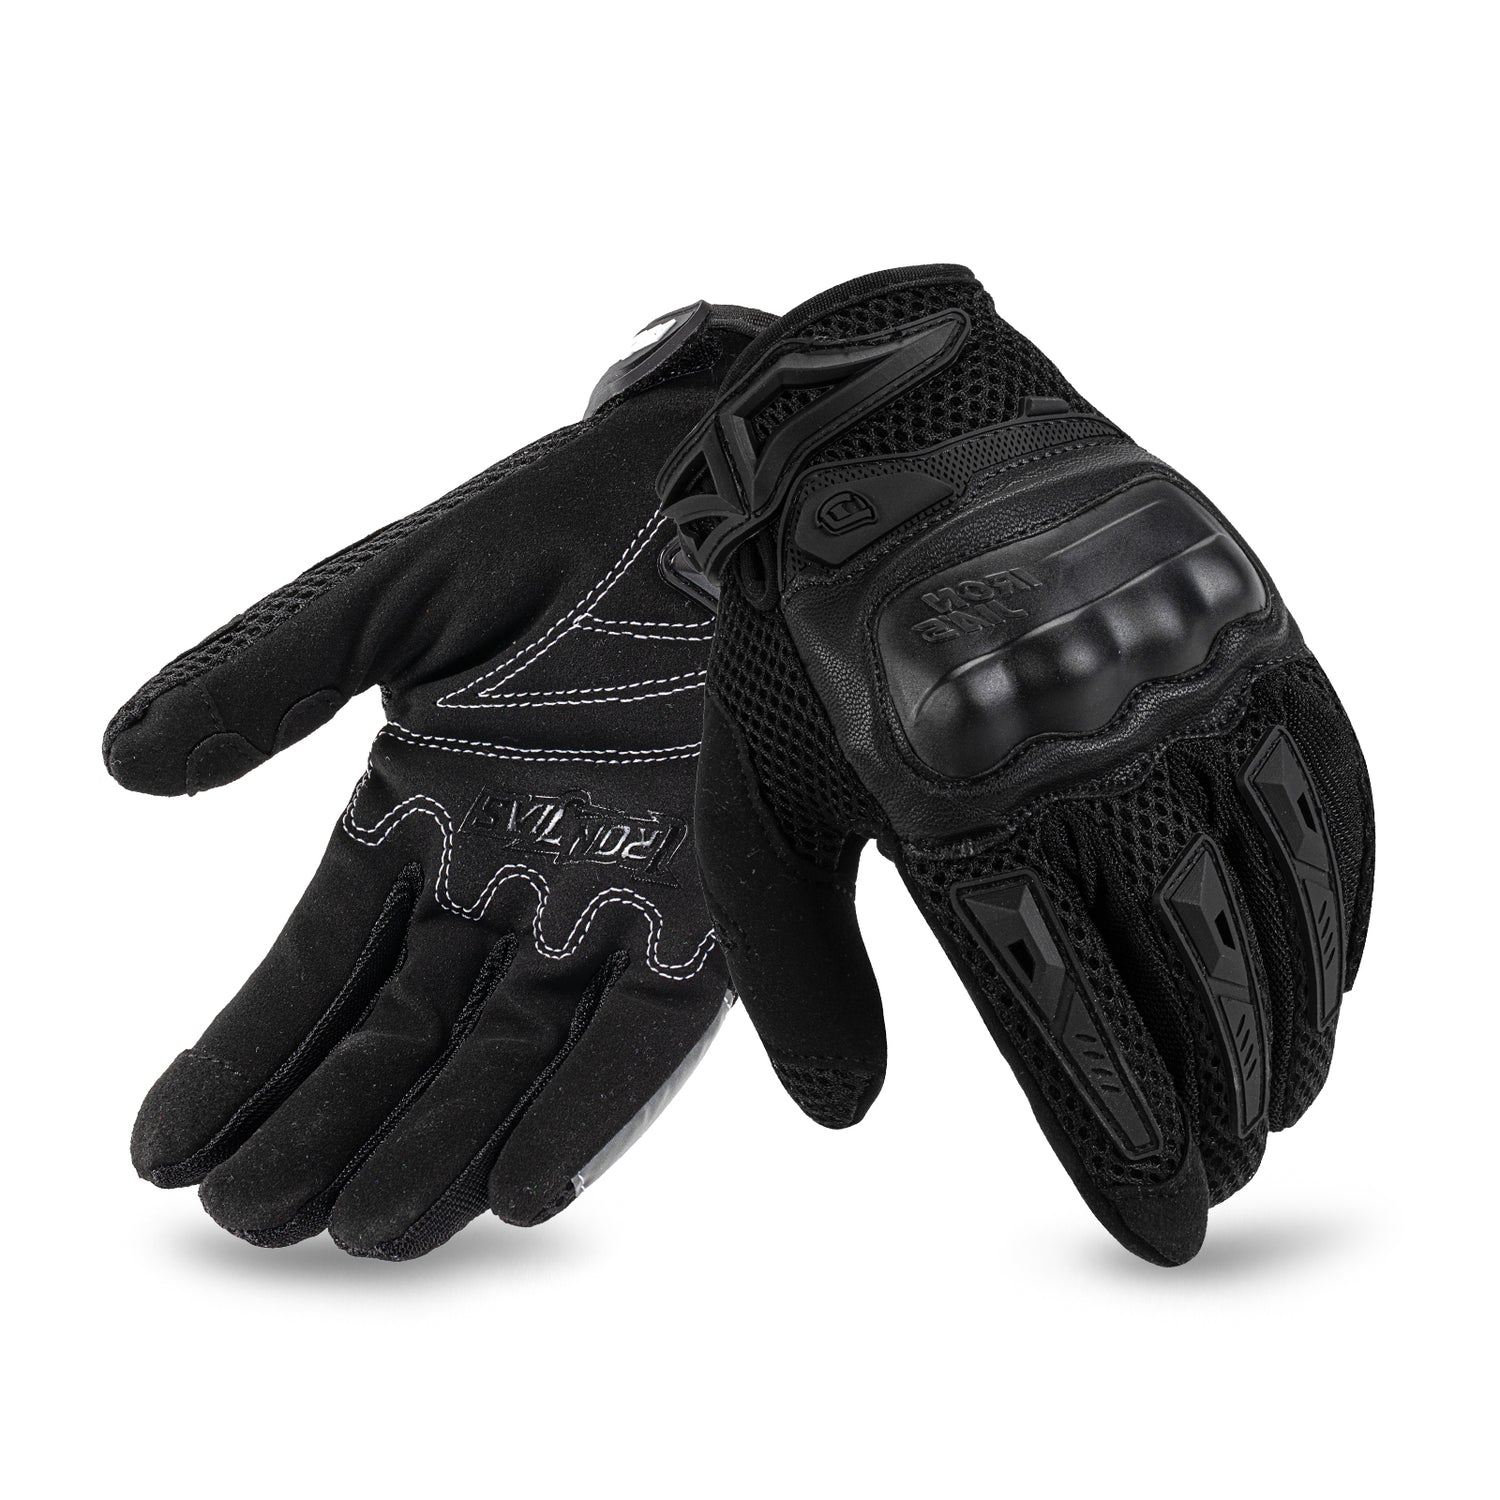 IRON JIA'S RIDING GLOVES, Motorcycles, Motorcycle Apparel on Carousell